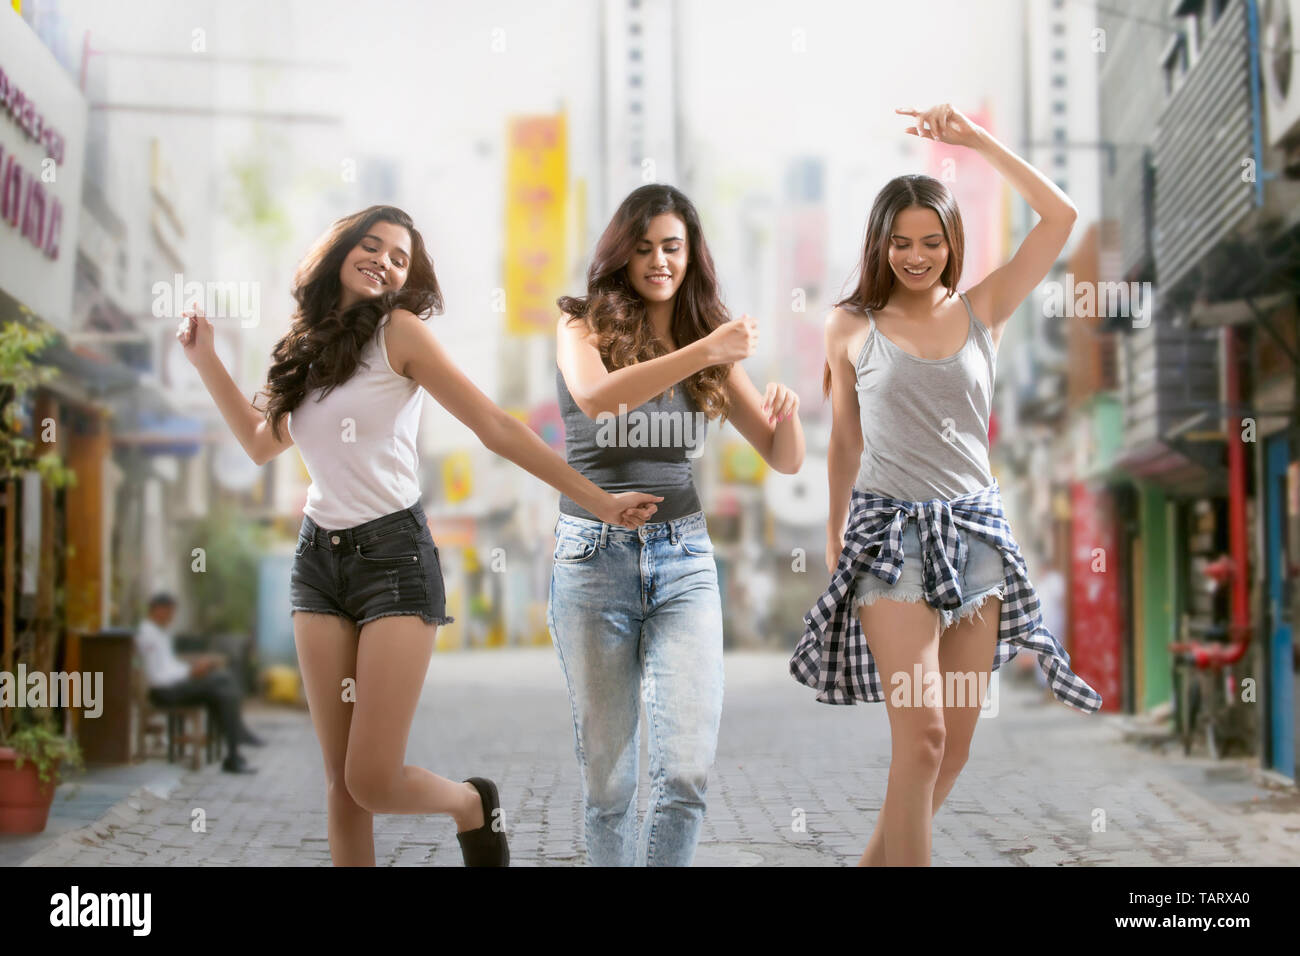 Trois girl friends dancing on street Banque D'Images